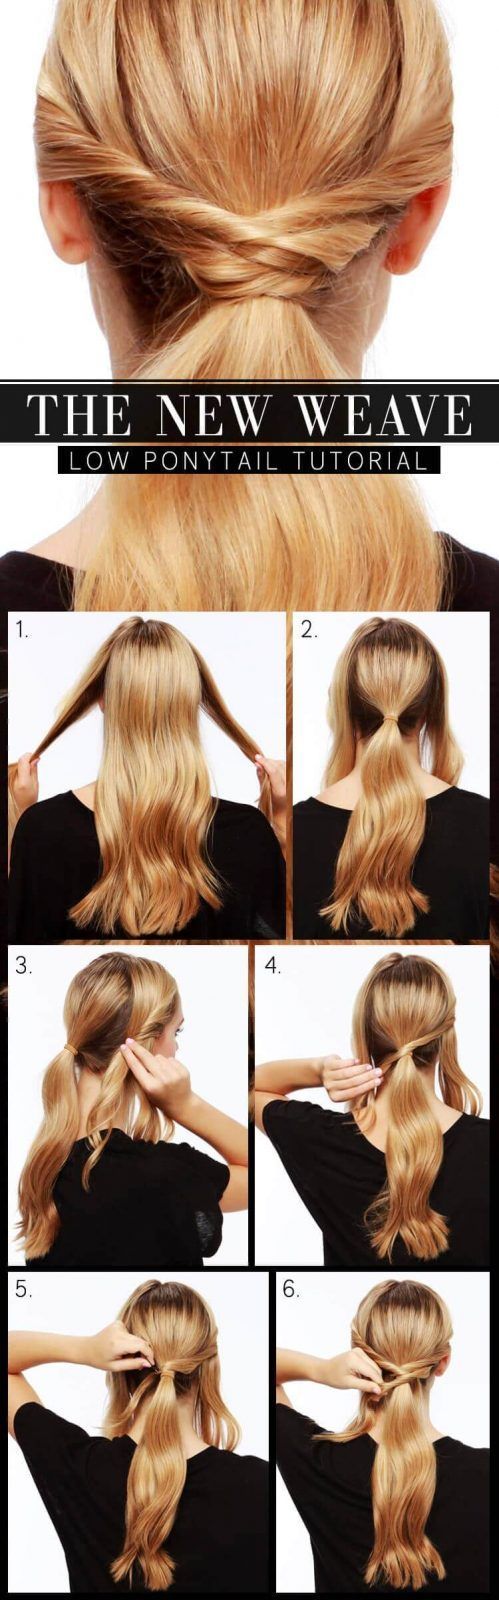 Classic and sweet hairstyle ideas for long hair - New Site